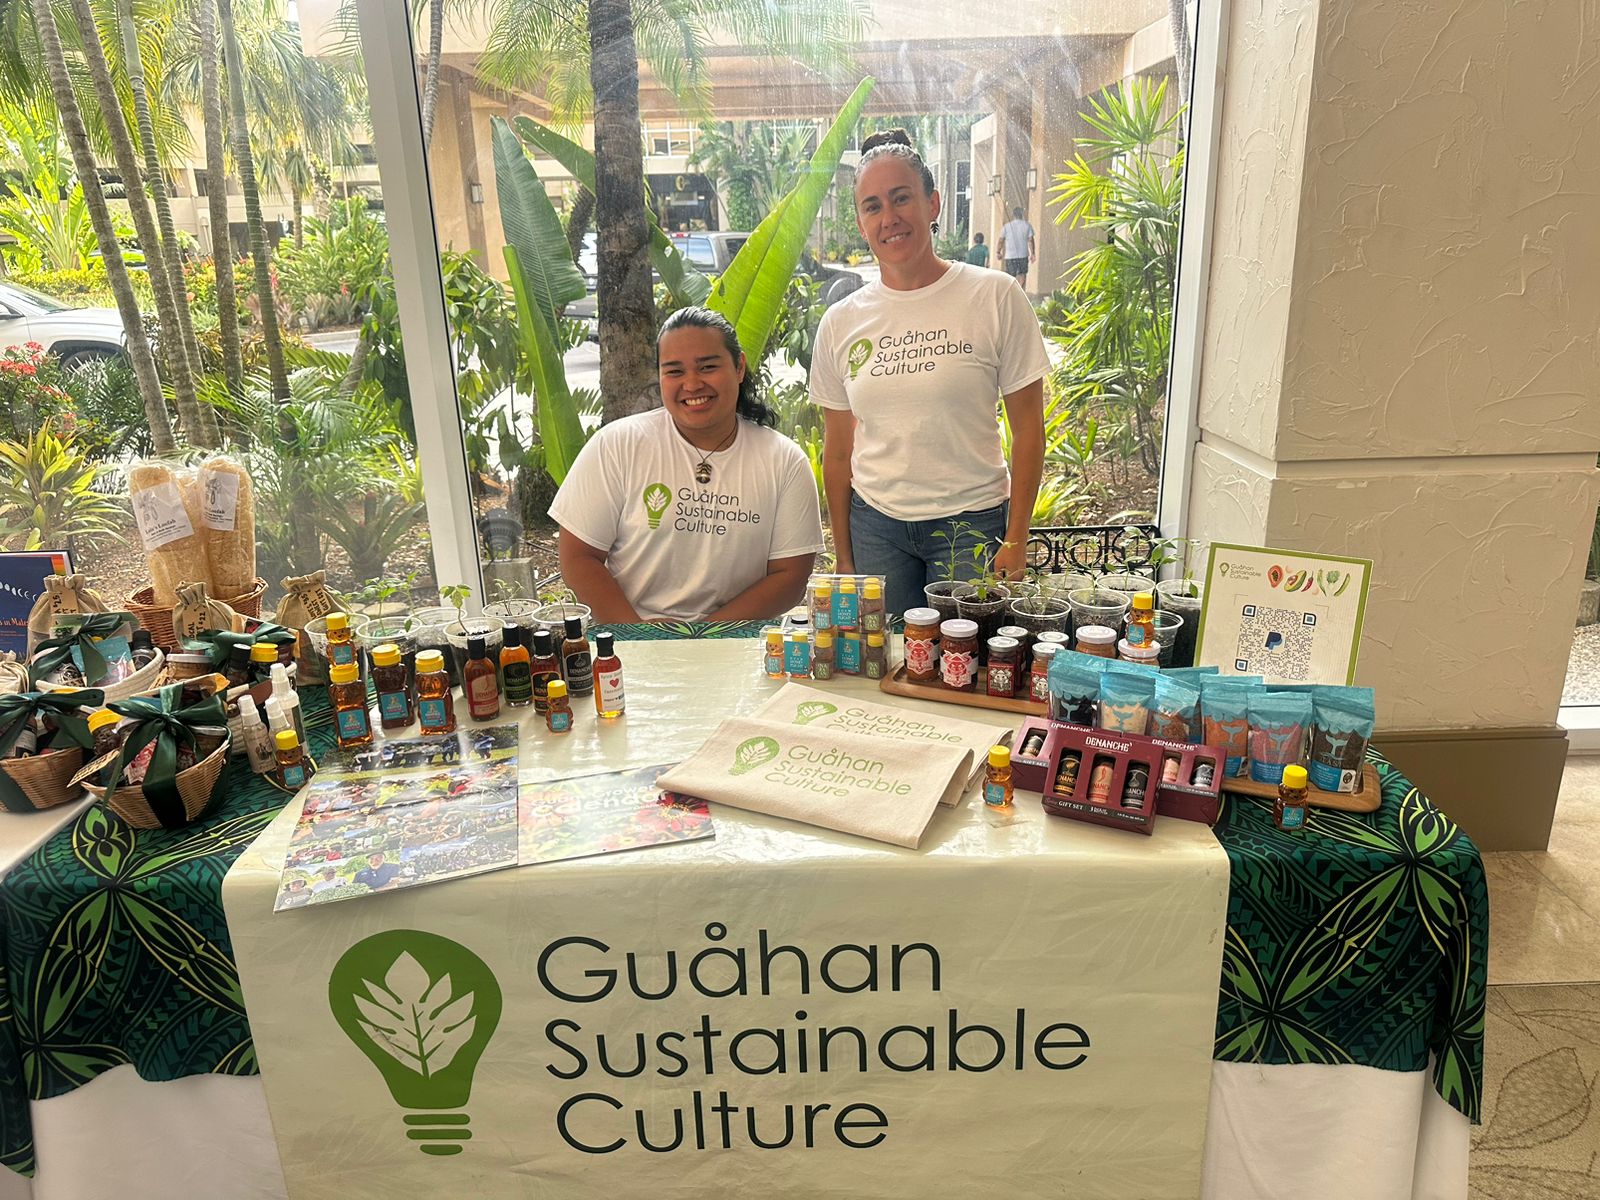 (From left) Devin Santos, content creator; Corinne Duenas, executive director; all with Guahan Sustainable Culture.